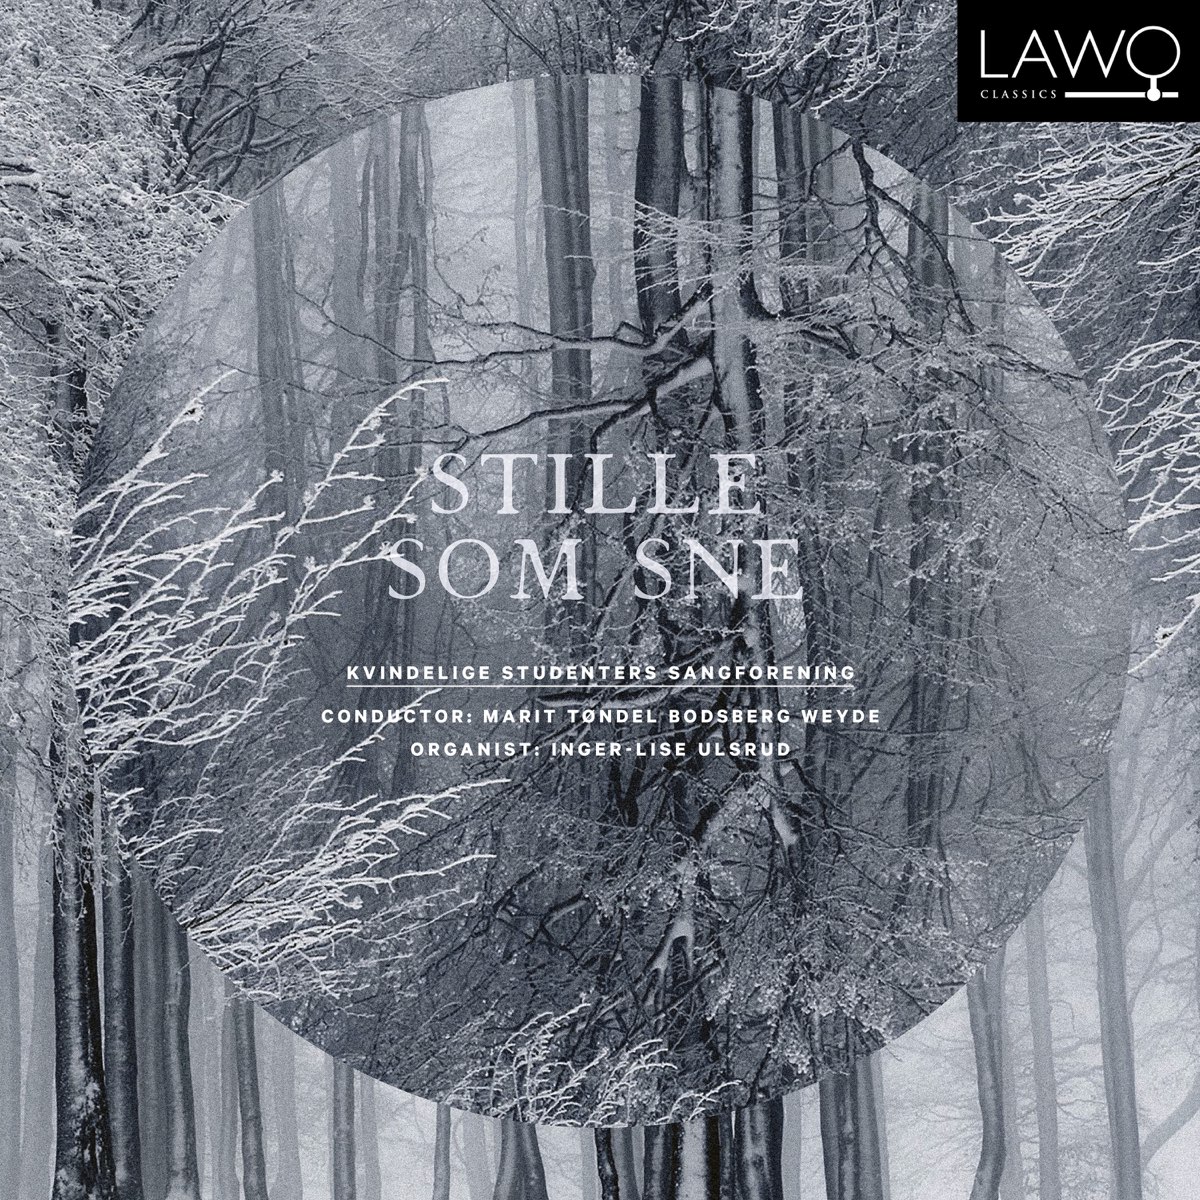 Stille som sne by Various Artists on Apple Music